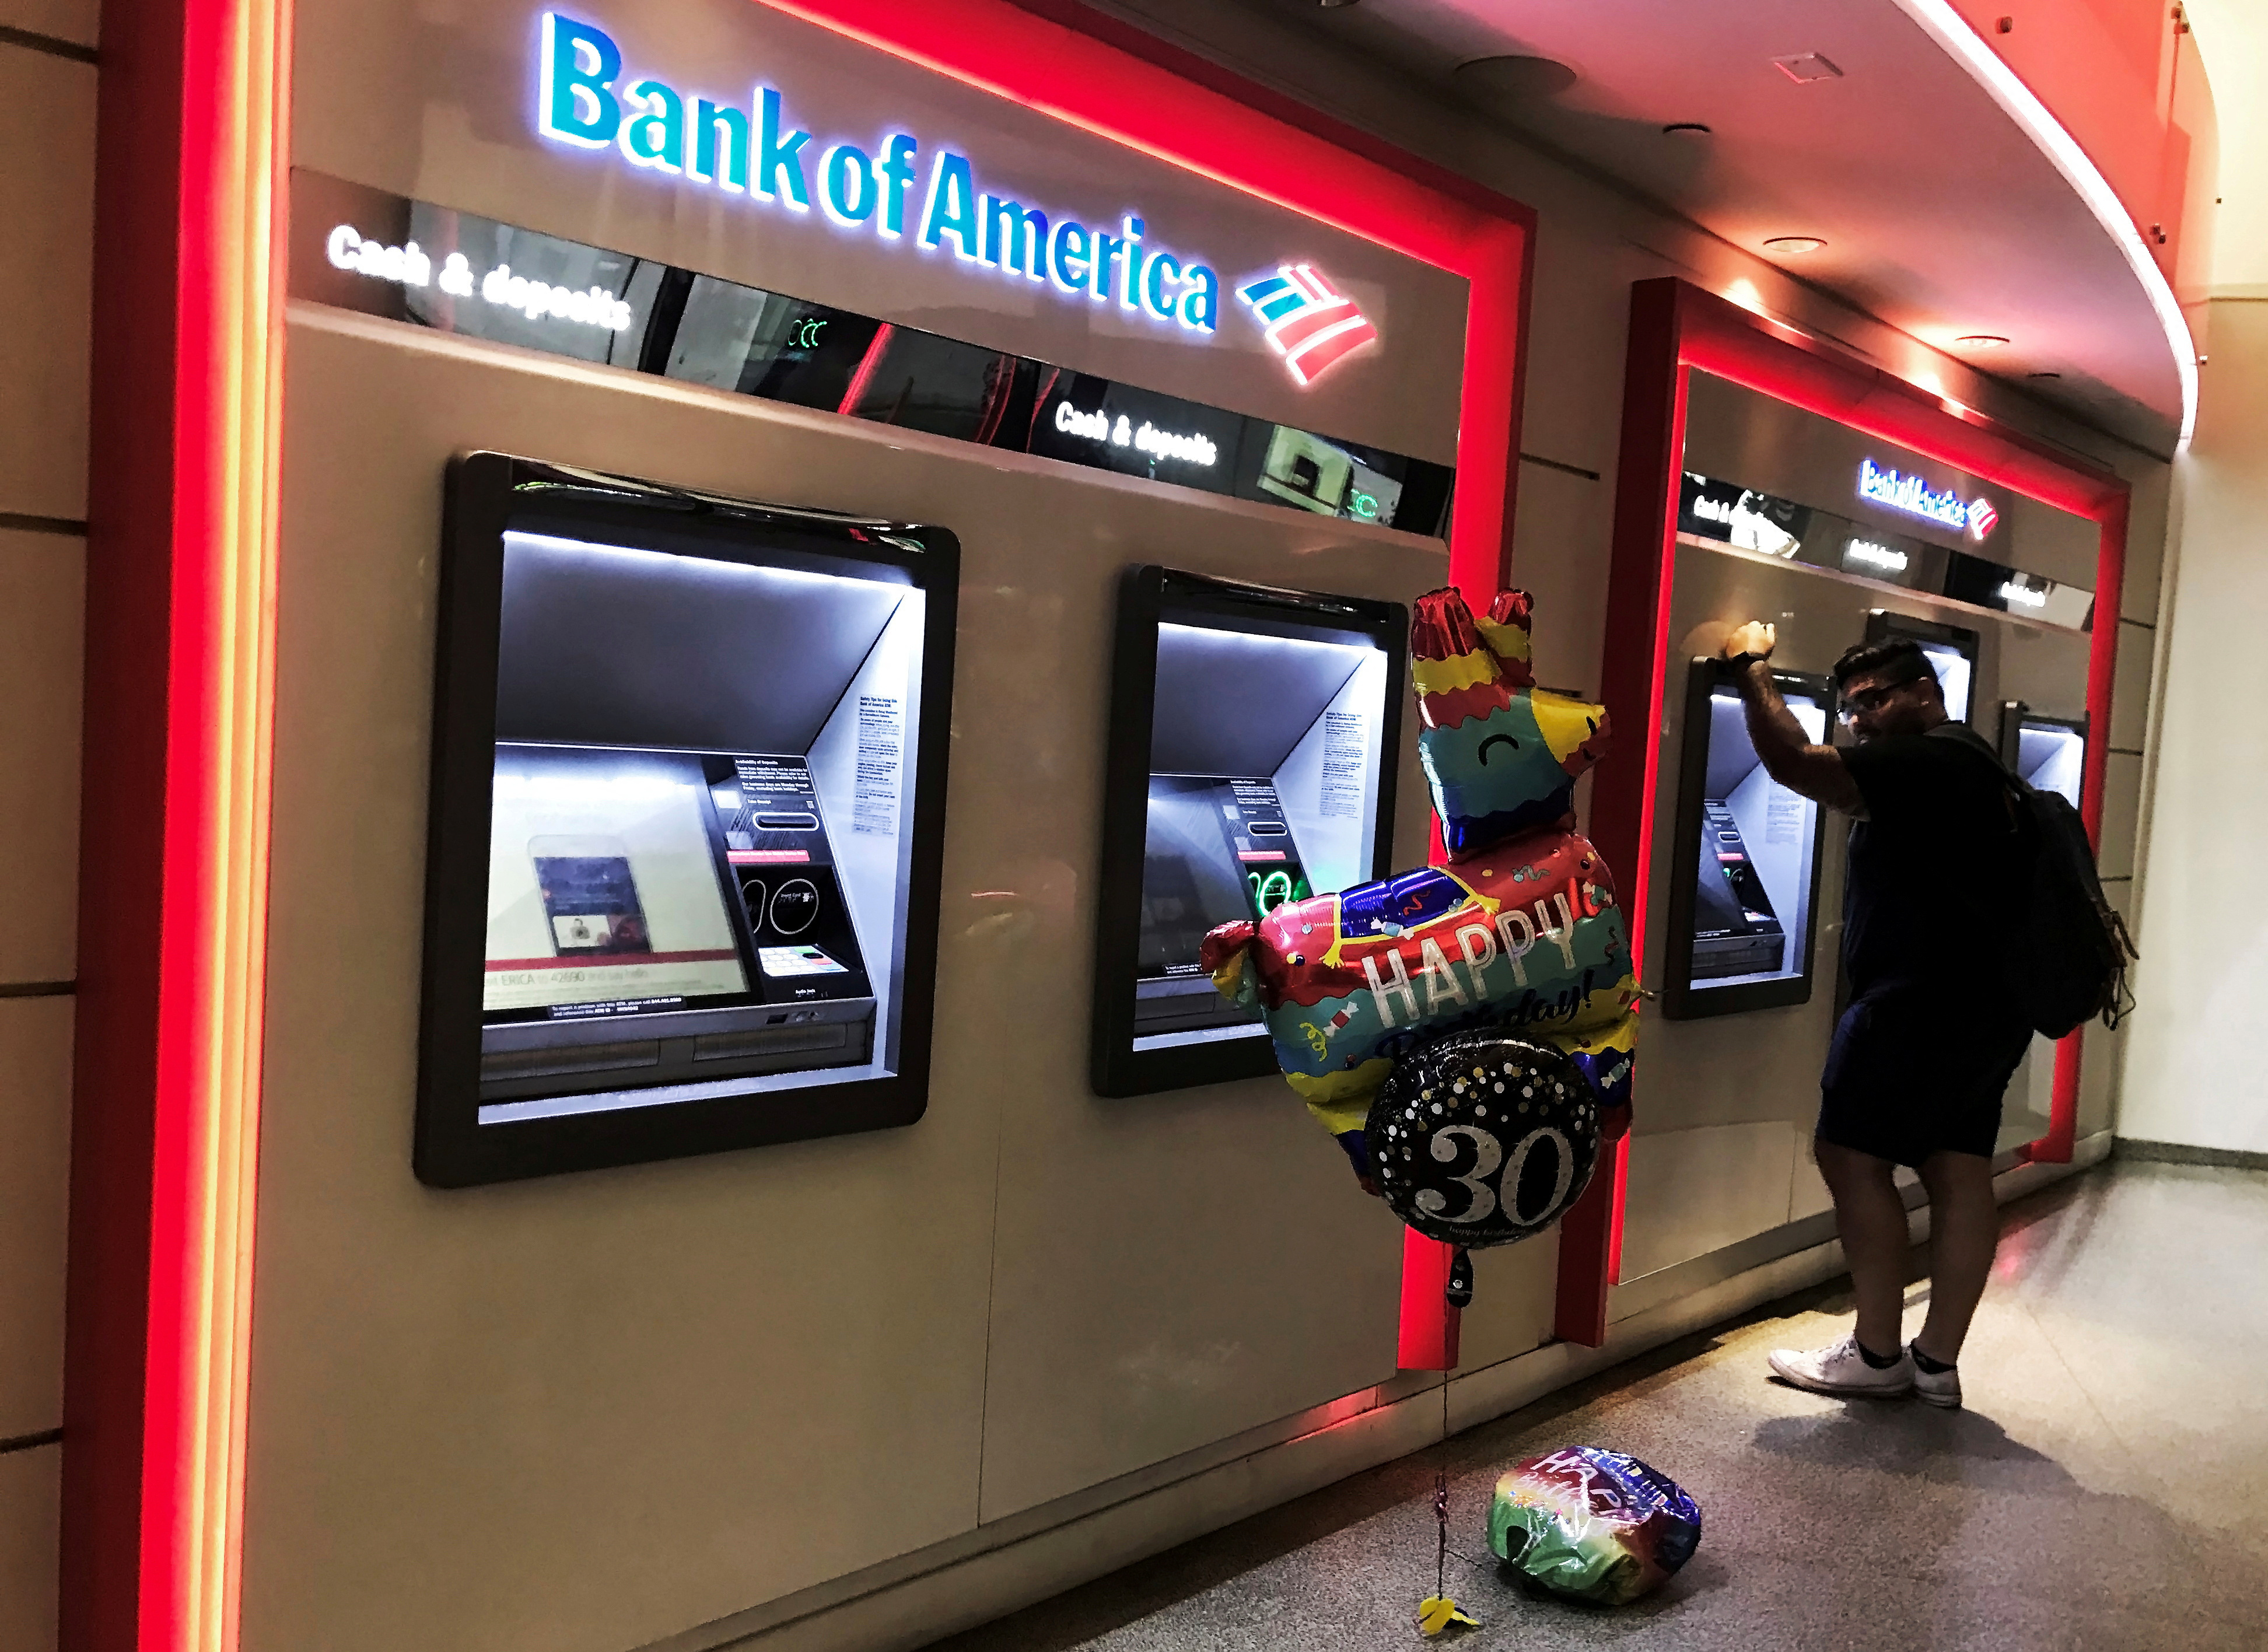 A man uses an ATM machine next an inflatable plastic balloon inside a Bank of America branch in Times Square in New York